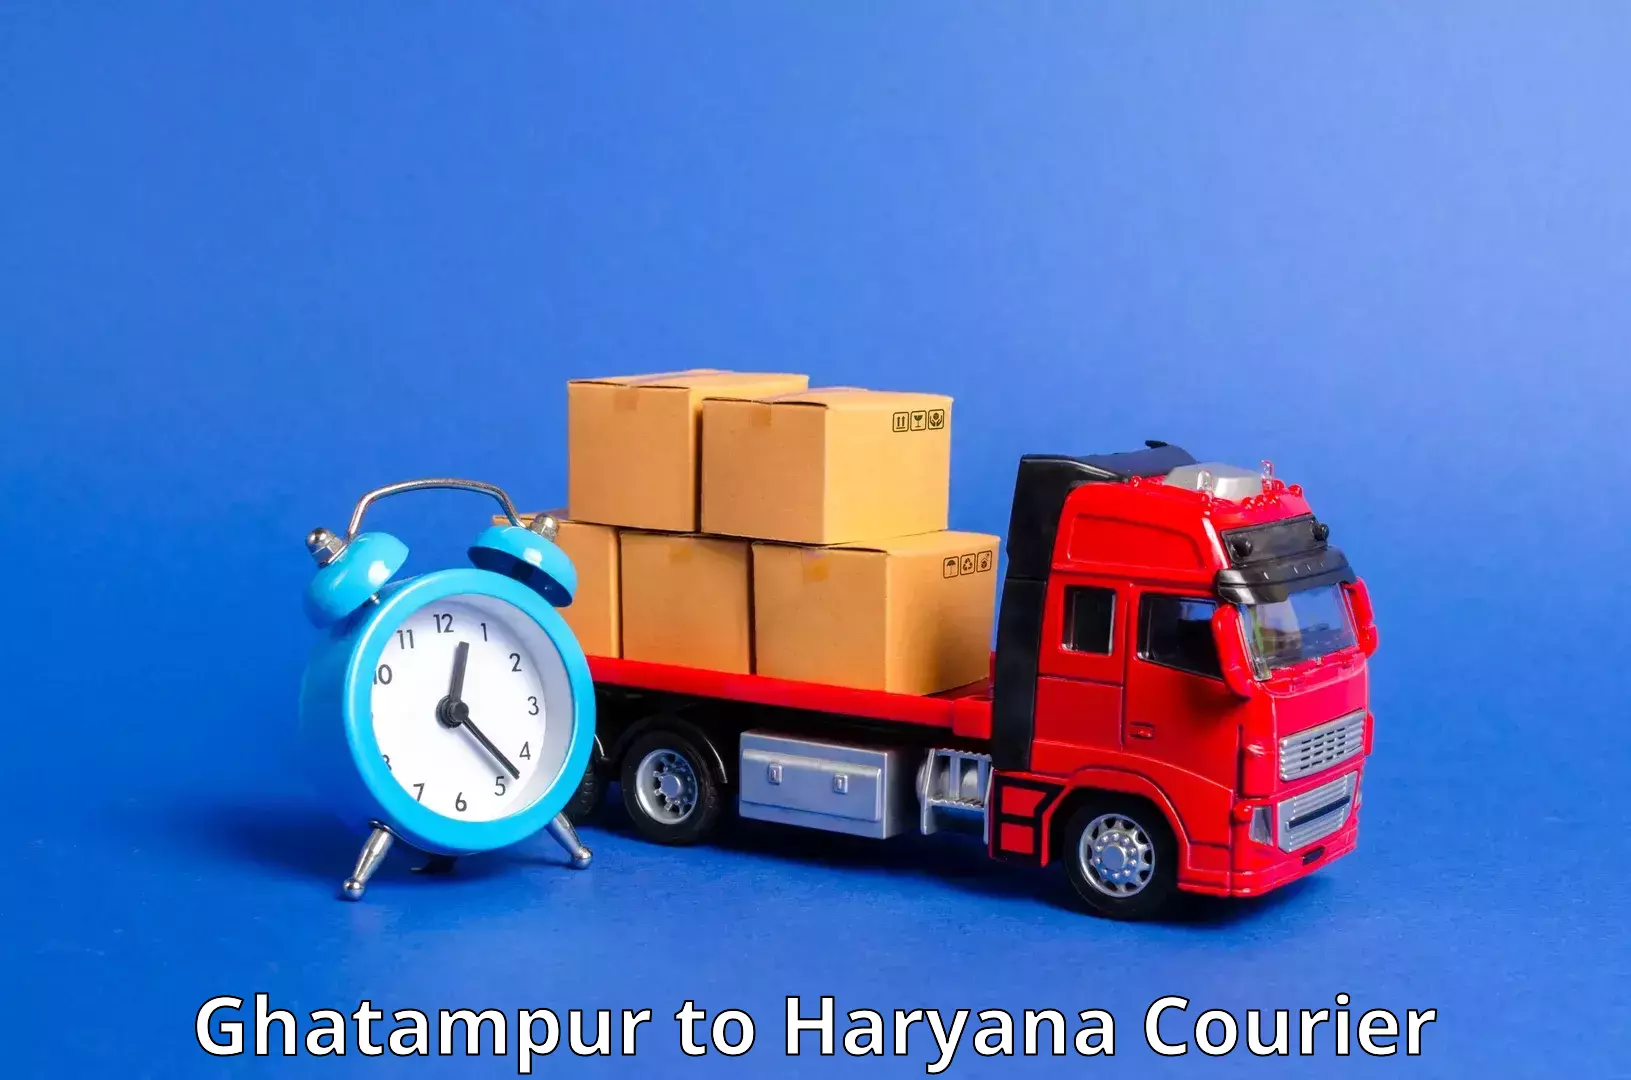 Enhanced tracking features Ghatampur to Faridabad